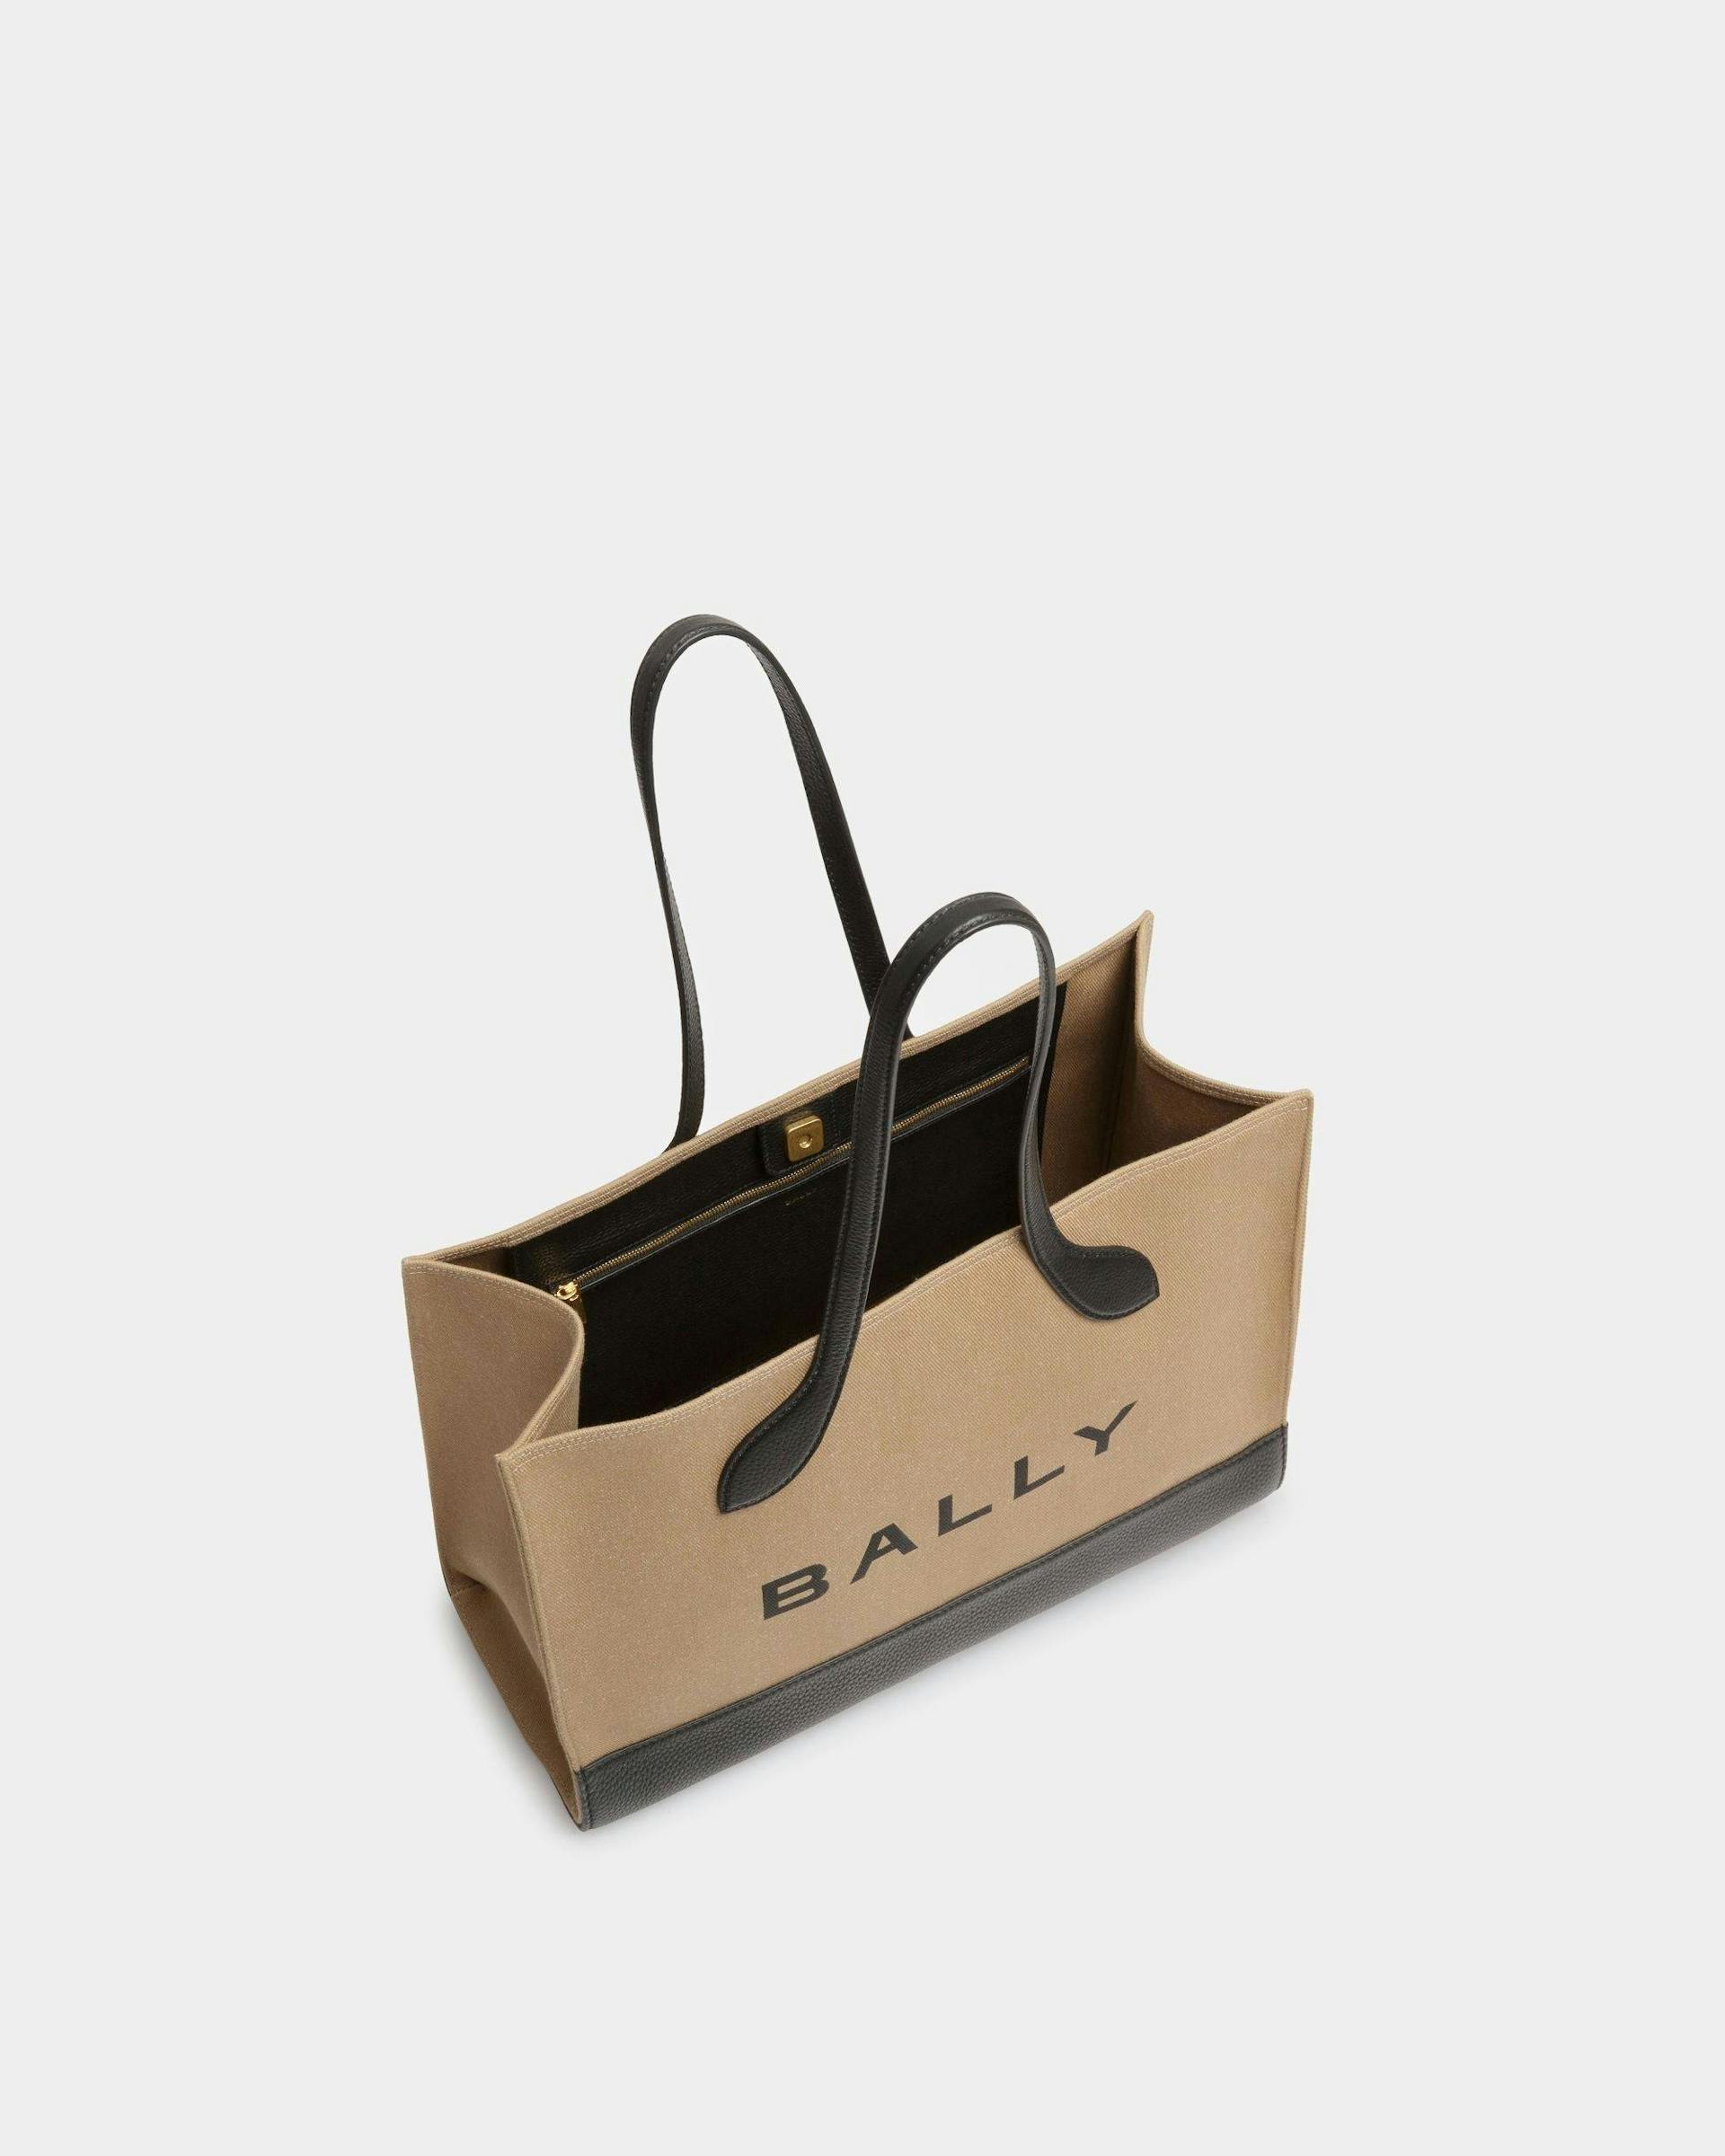 Bar Tote Bag In Sand And Black Fabric - Women's - Bally - 05